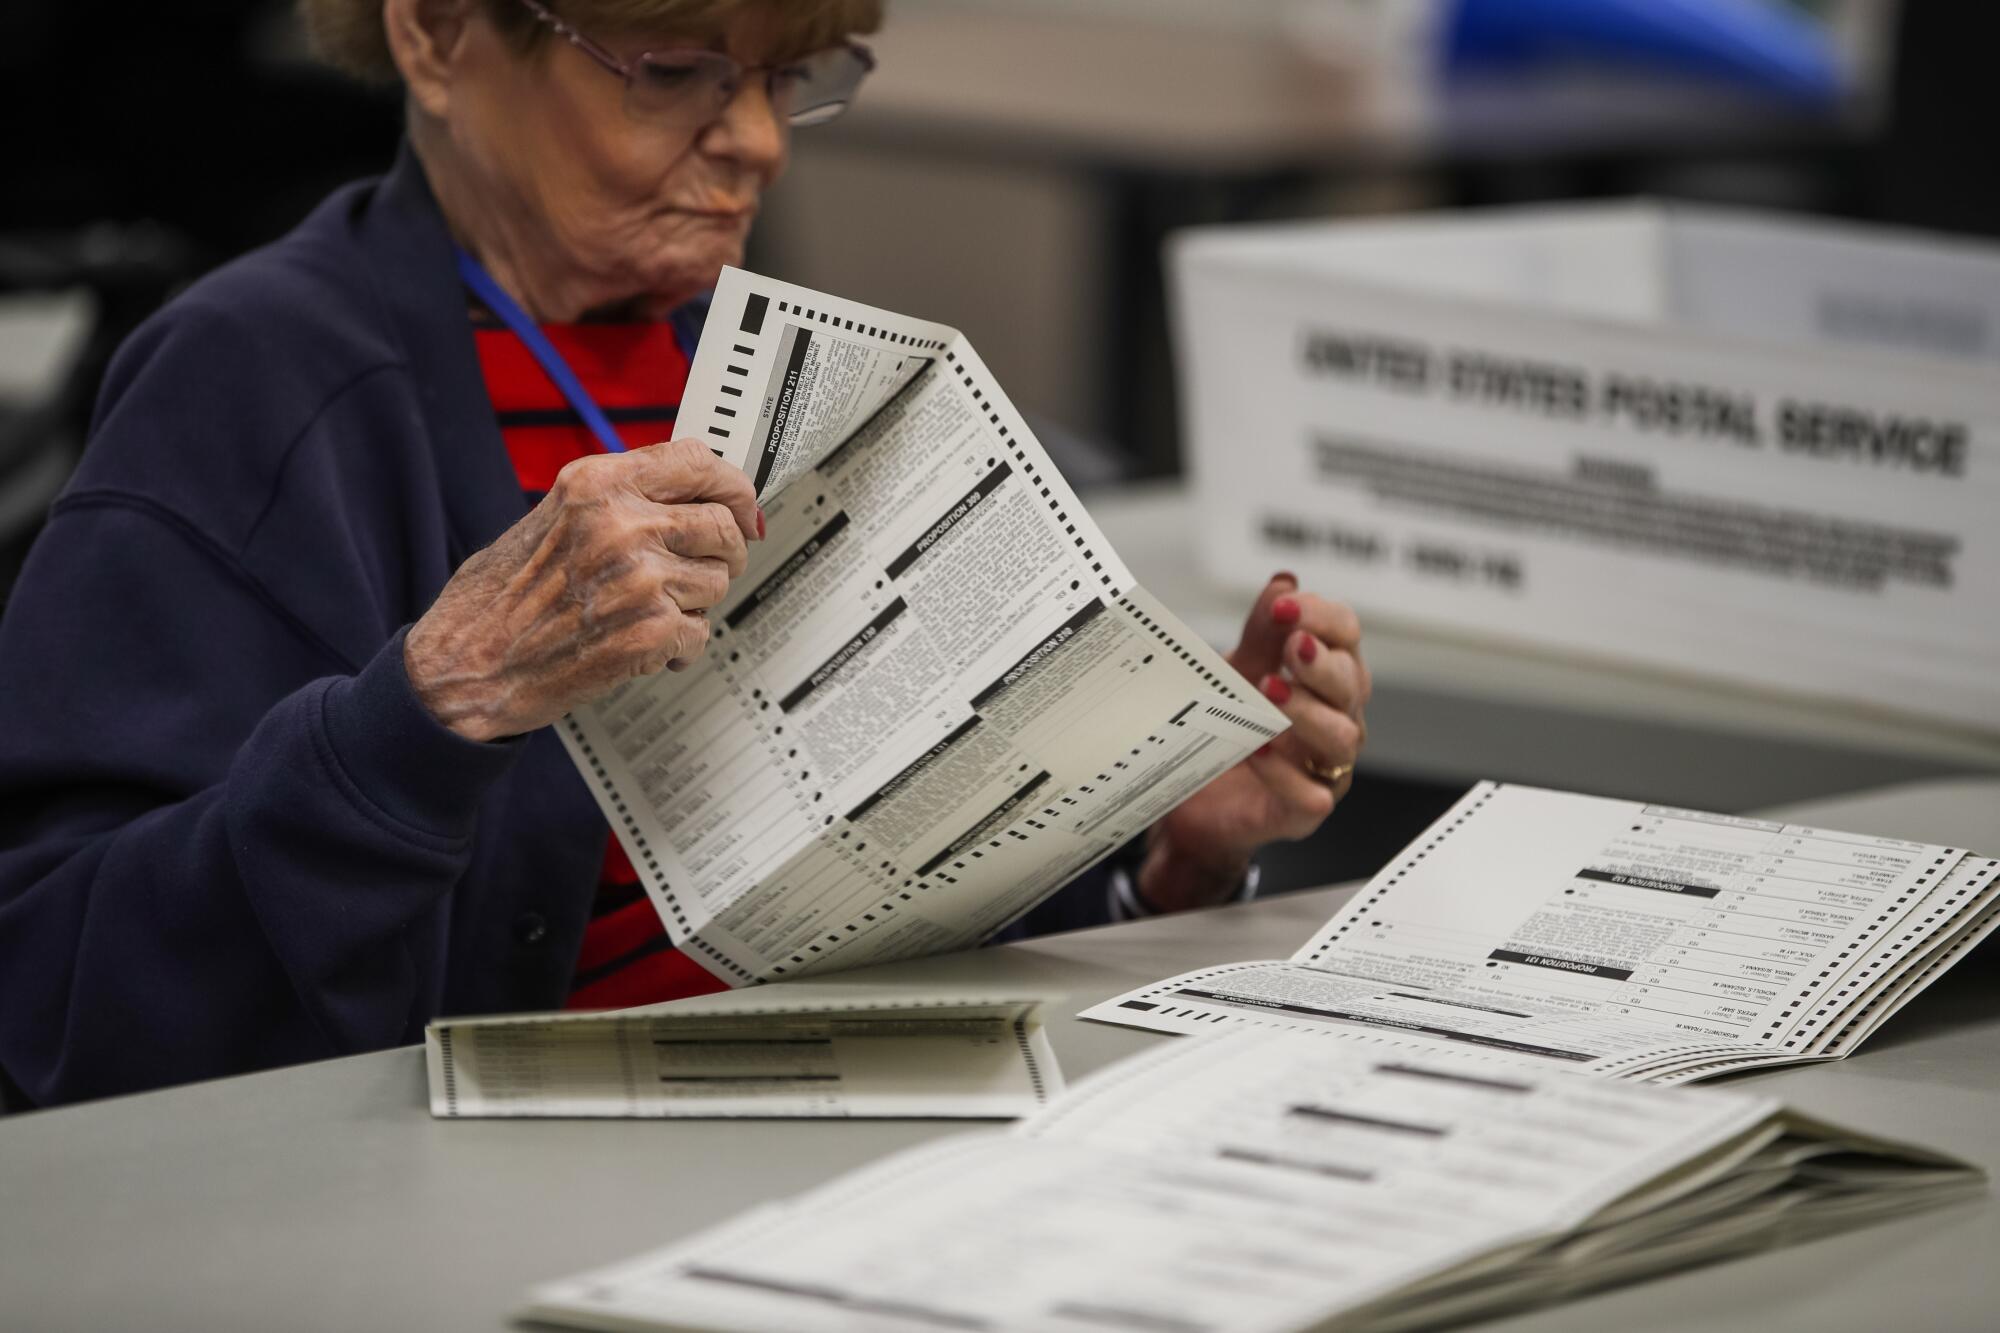 An election worker looks over ballots in Phoenix.